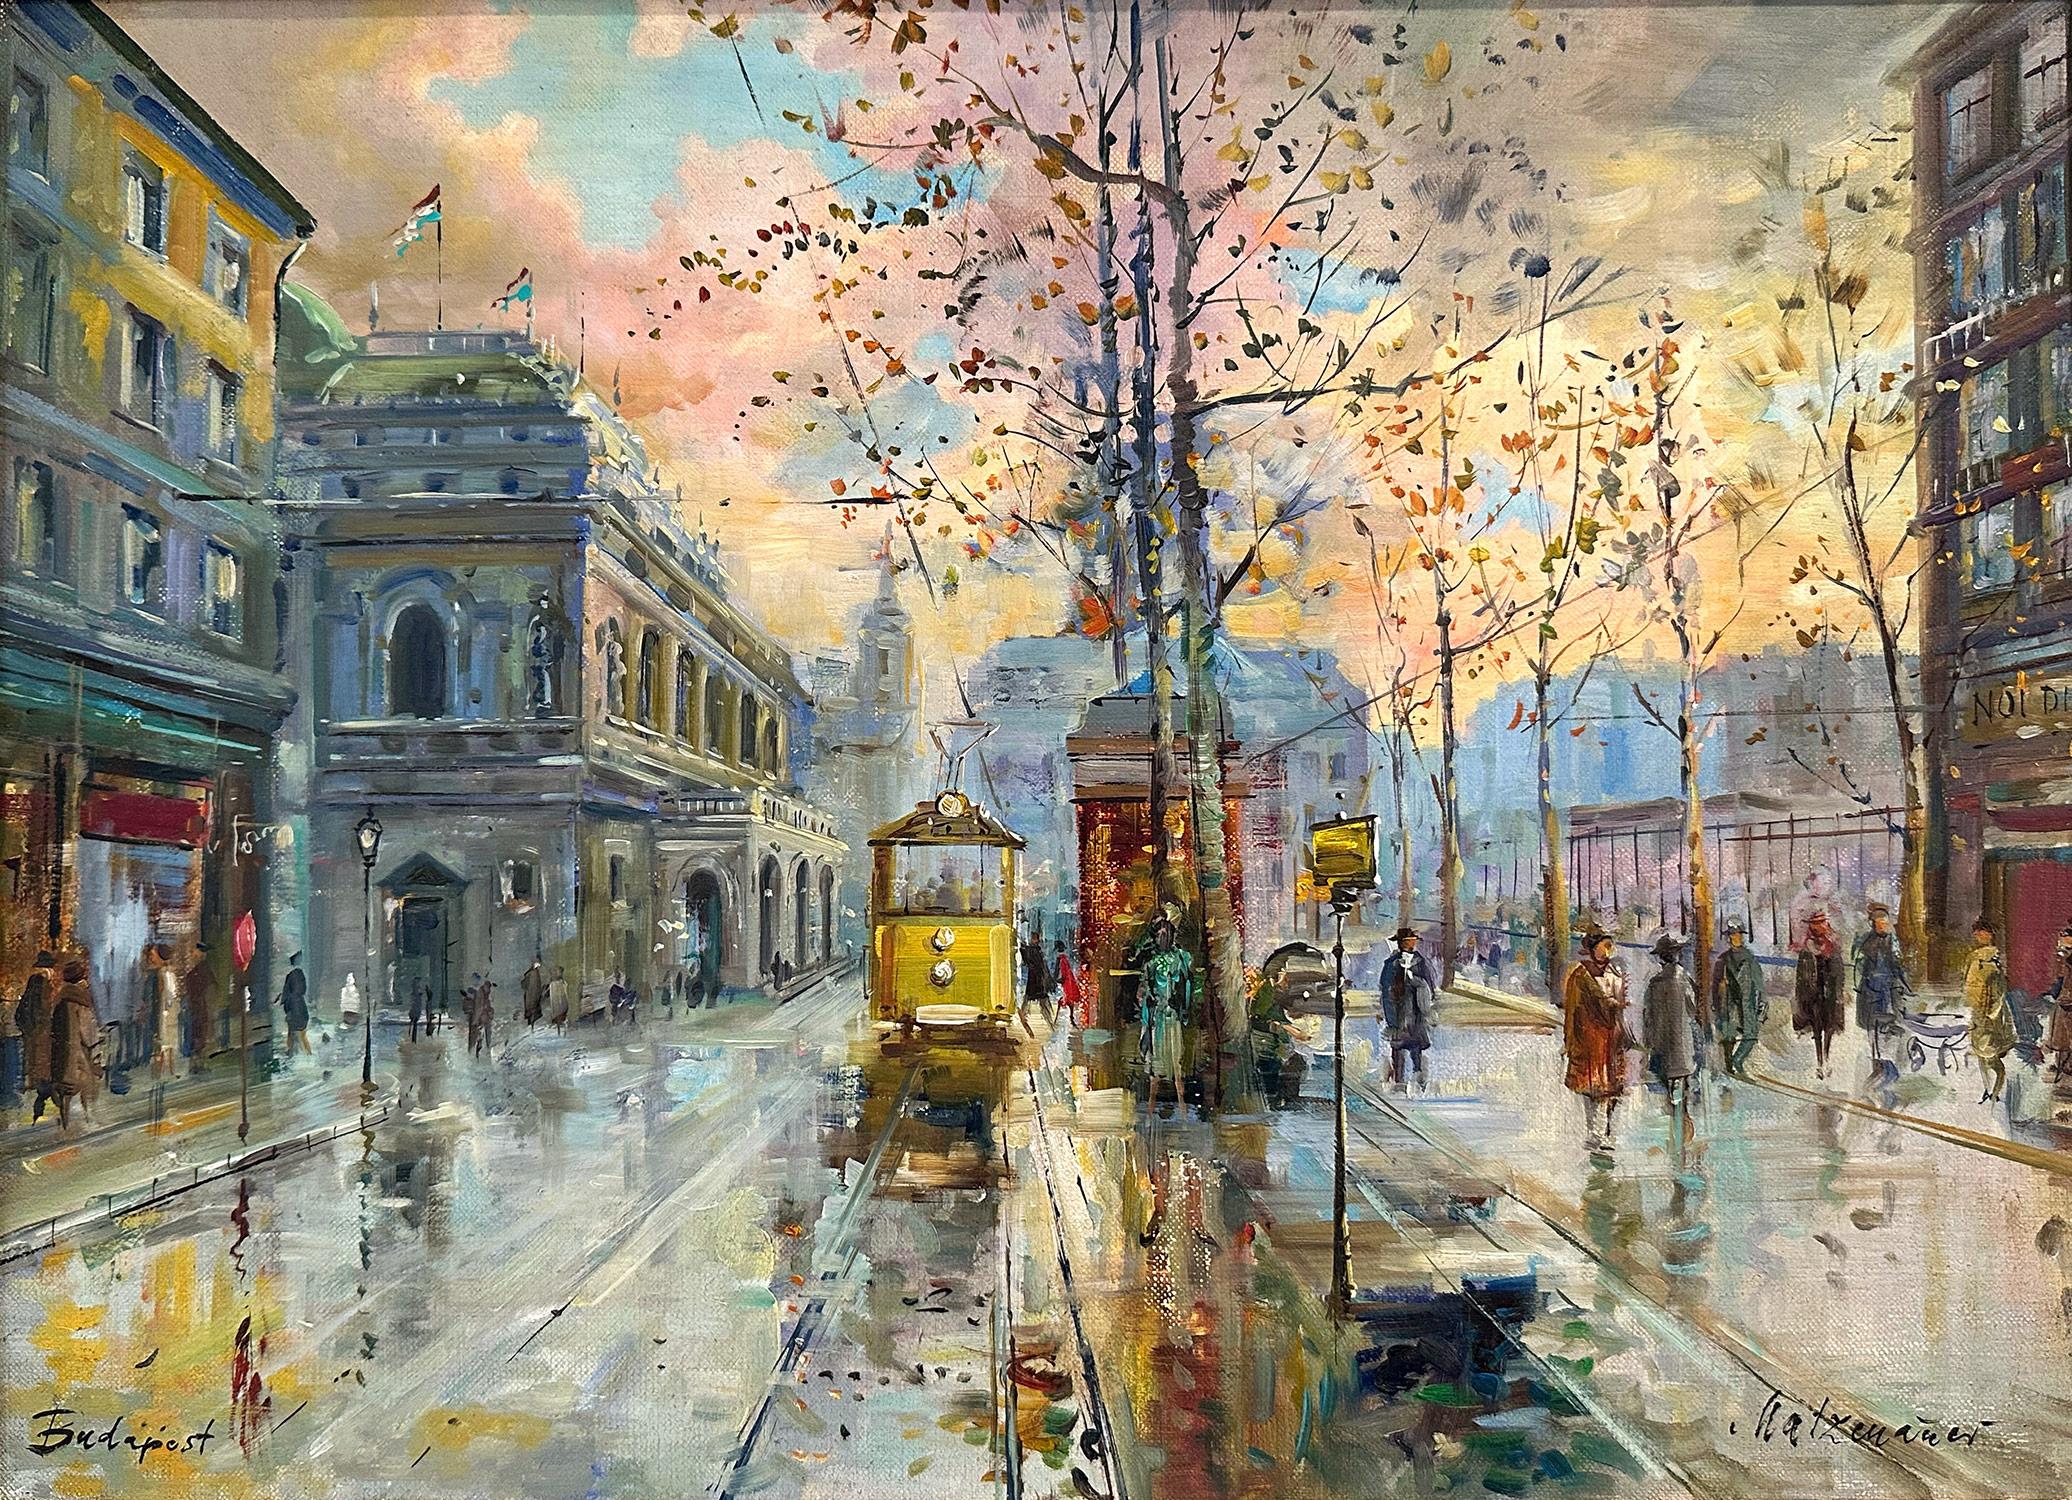 A beautiful oil on canvas painting by Hungarian artist, Hugo Matzenauer. Matzenauer was a painter known for his colorful cityscapes depicting the times of his generation. His work is comparable to those of Jules Herve, Antoine Blanchard, and Edouard